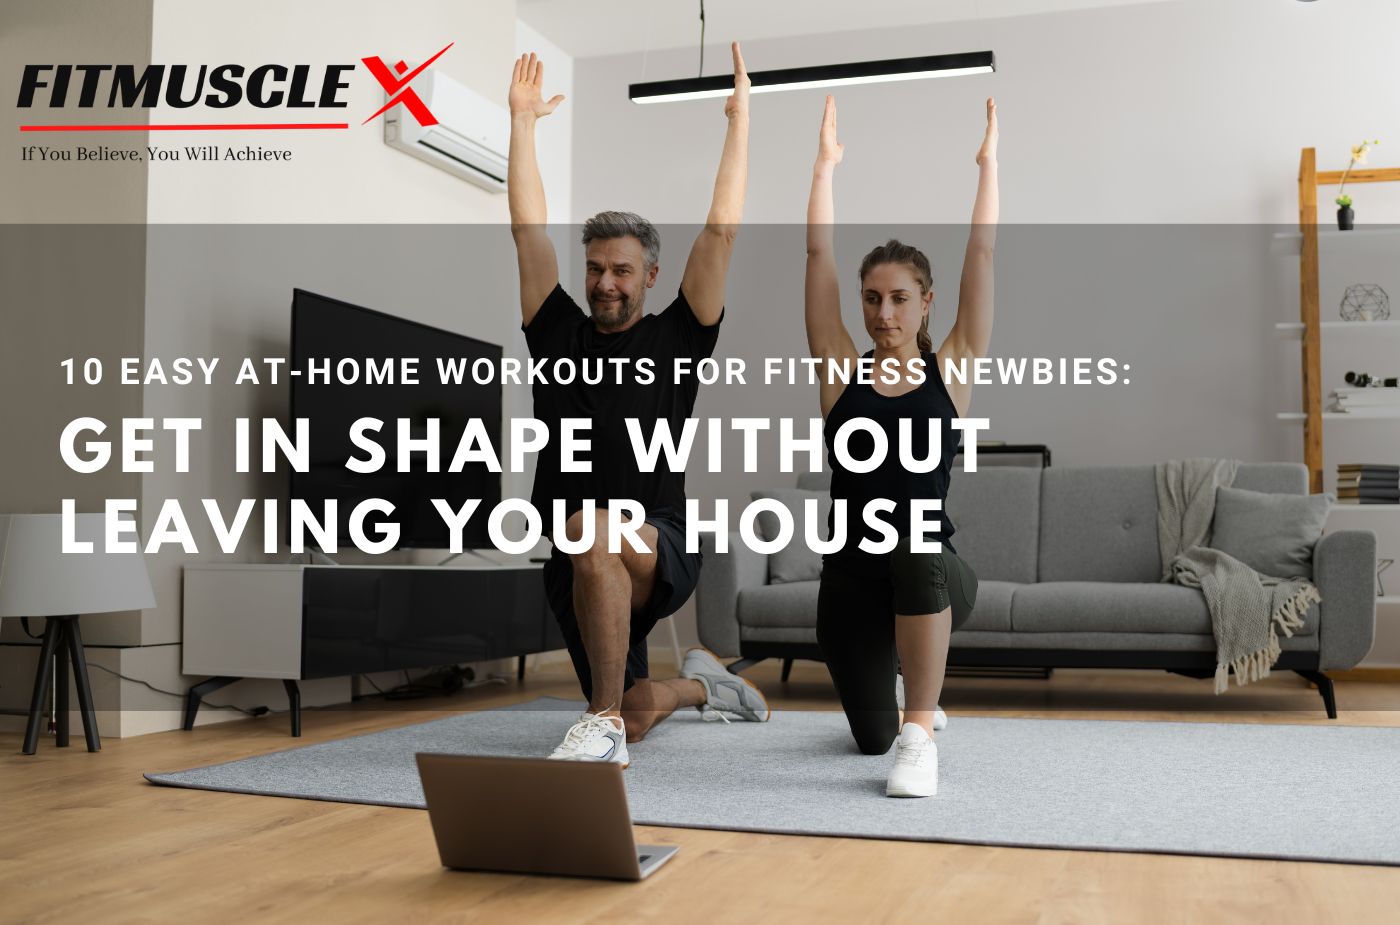 10 Easy At-Home Workouts for Fitness Newbies: Get in Shape without Leaving Your House